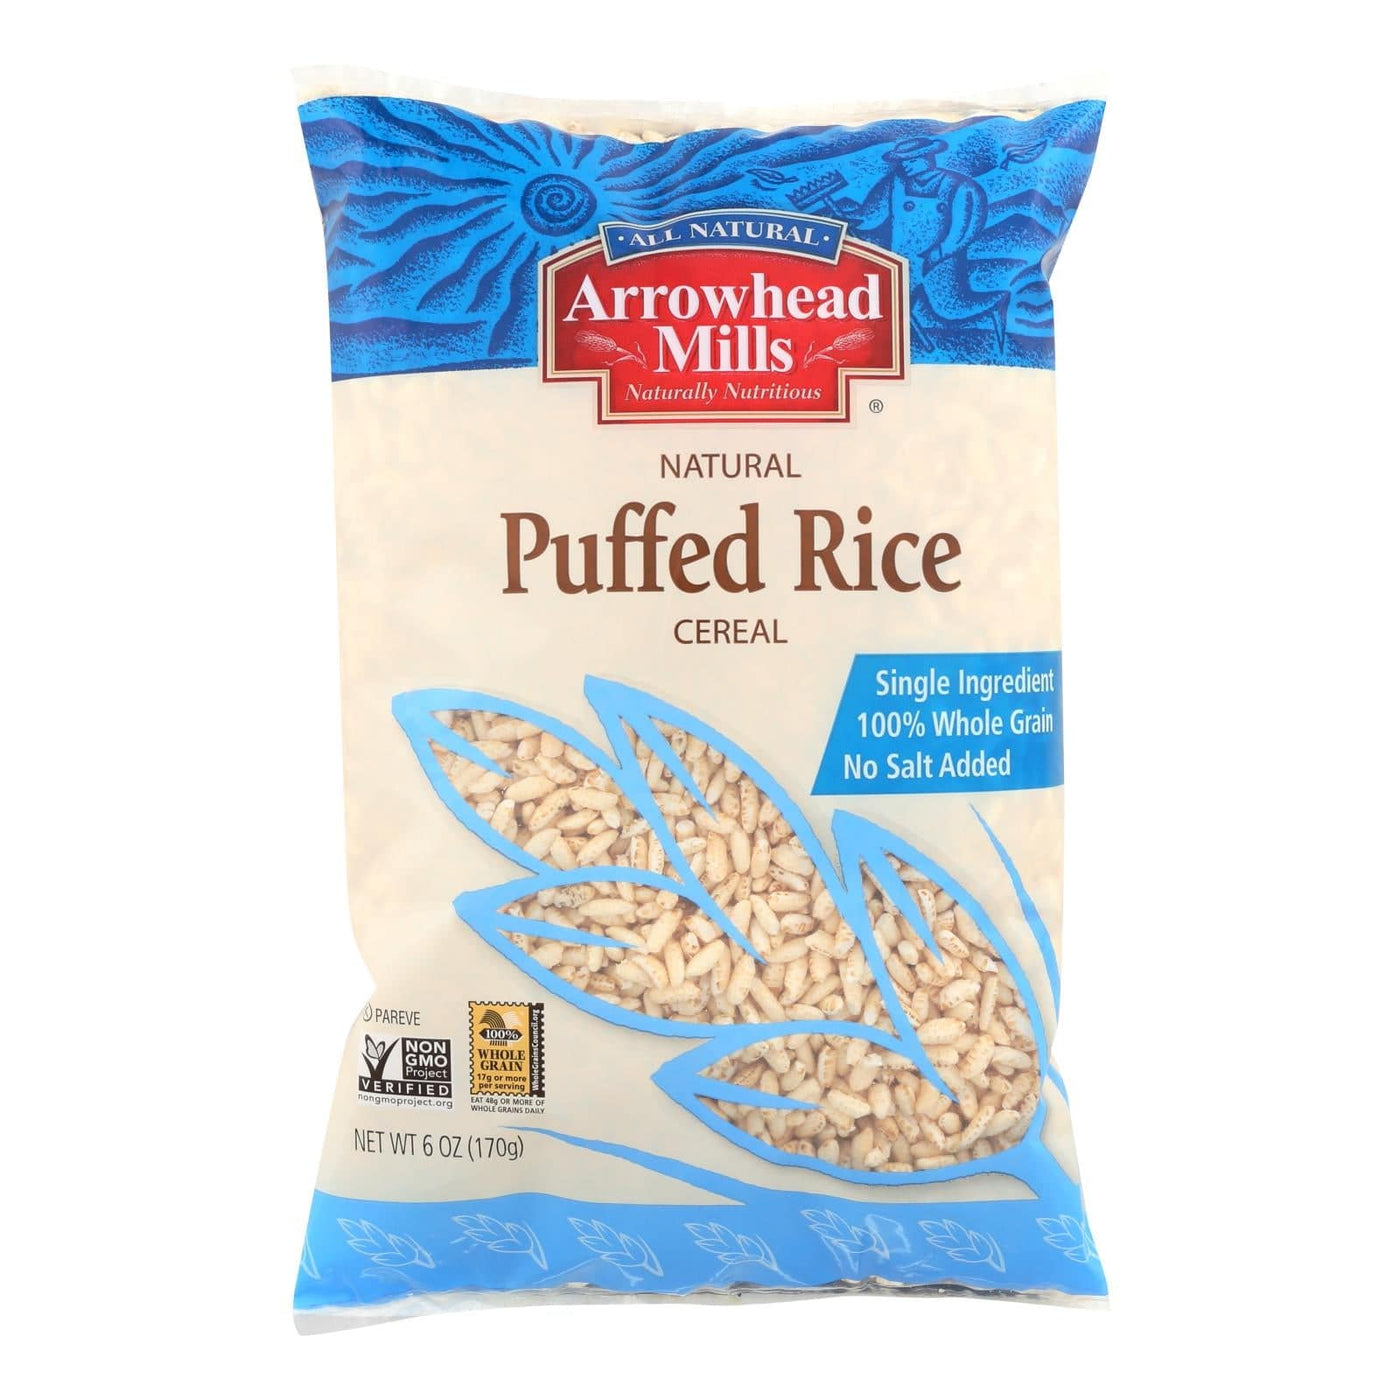 Buy Arrowhead Mills - All Natural Puffed Rice Cereal - Case Of 12 - 6 Oz.  at OnlyNaturals.us